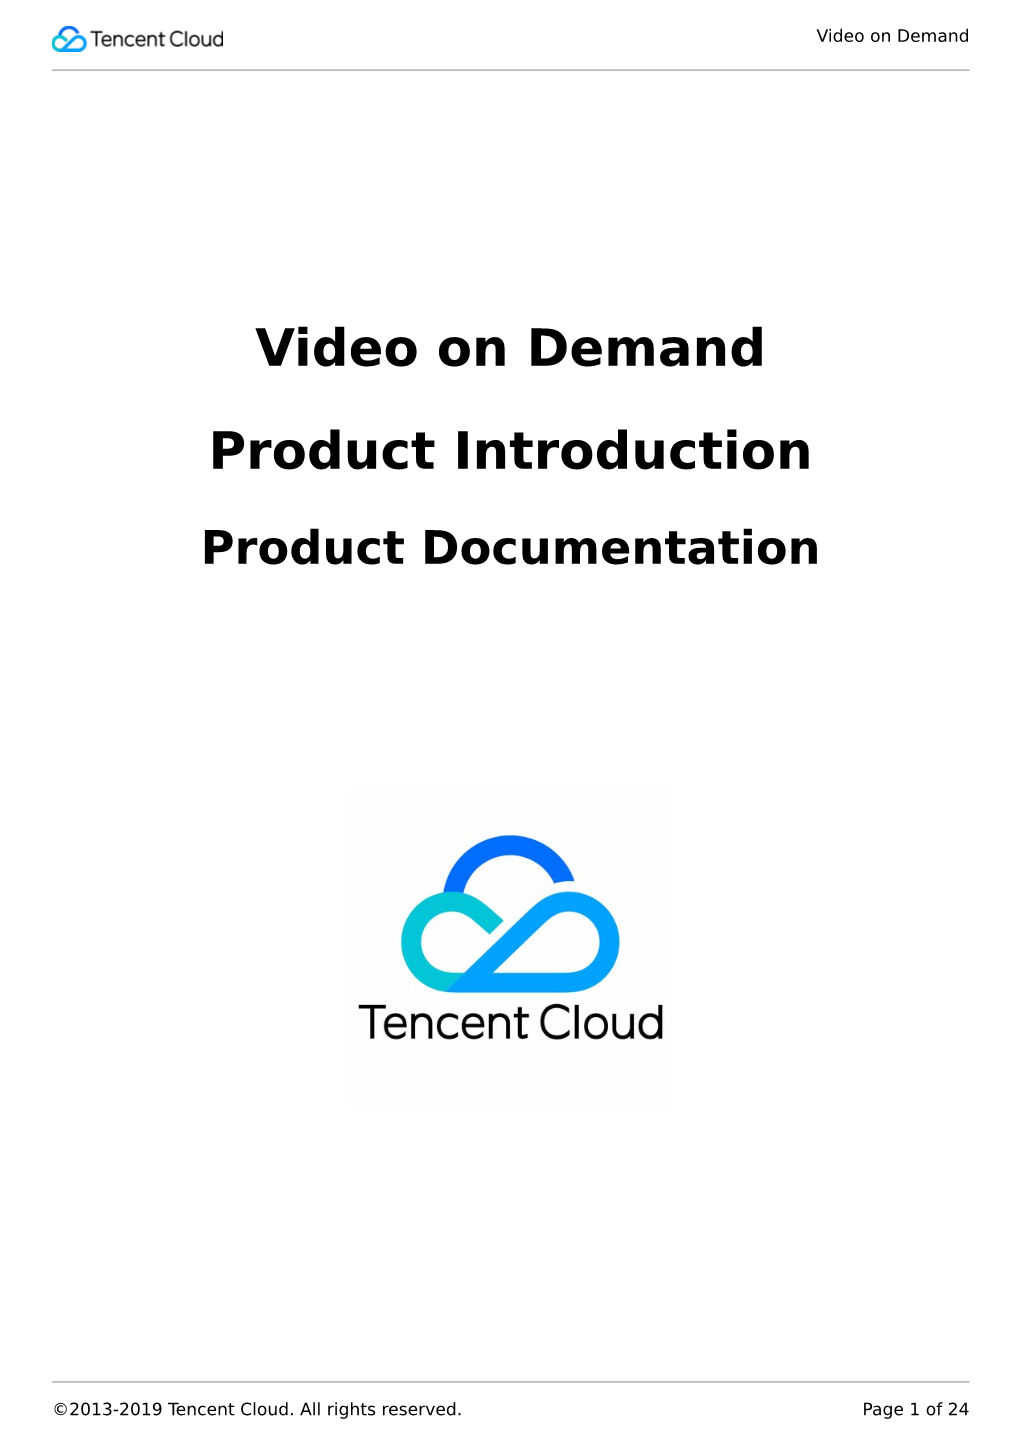 Video on Demand Product Introduction